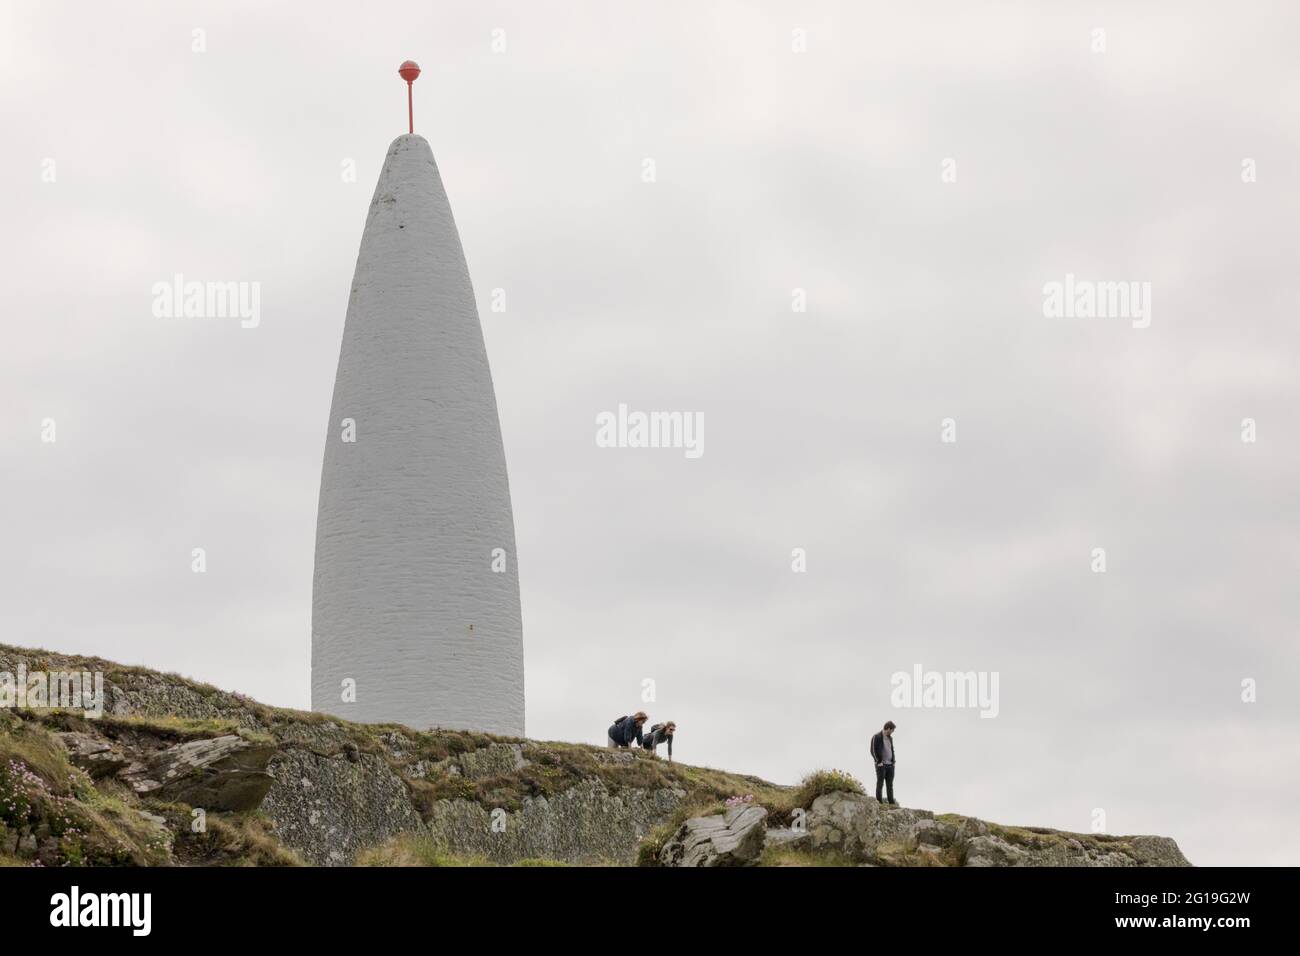 Baltimore, Cork, Ireland. 05th June, 2021. Two visitors get down on their hands and kness to check the drop down to the sea from the cliffs at the Beacon in Baltimore, Co. Cork, Ireland.   - Credit; David Creedon / Alamy Stock Photo